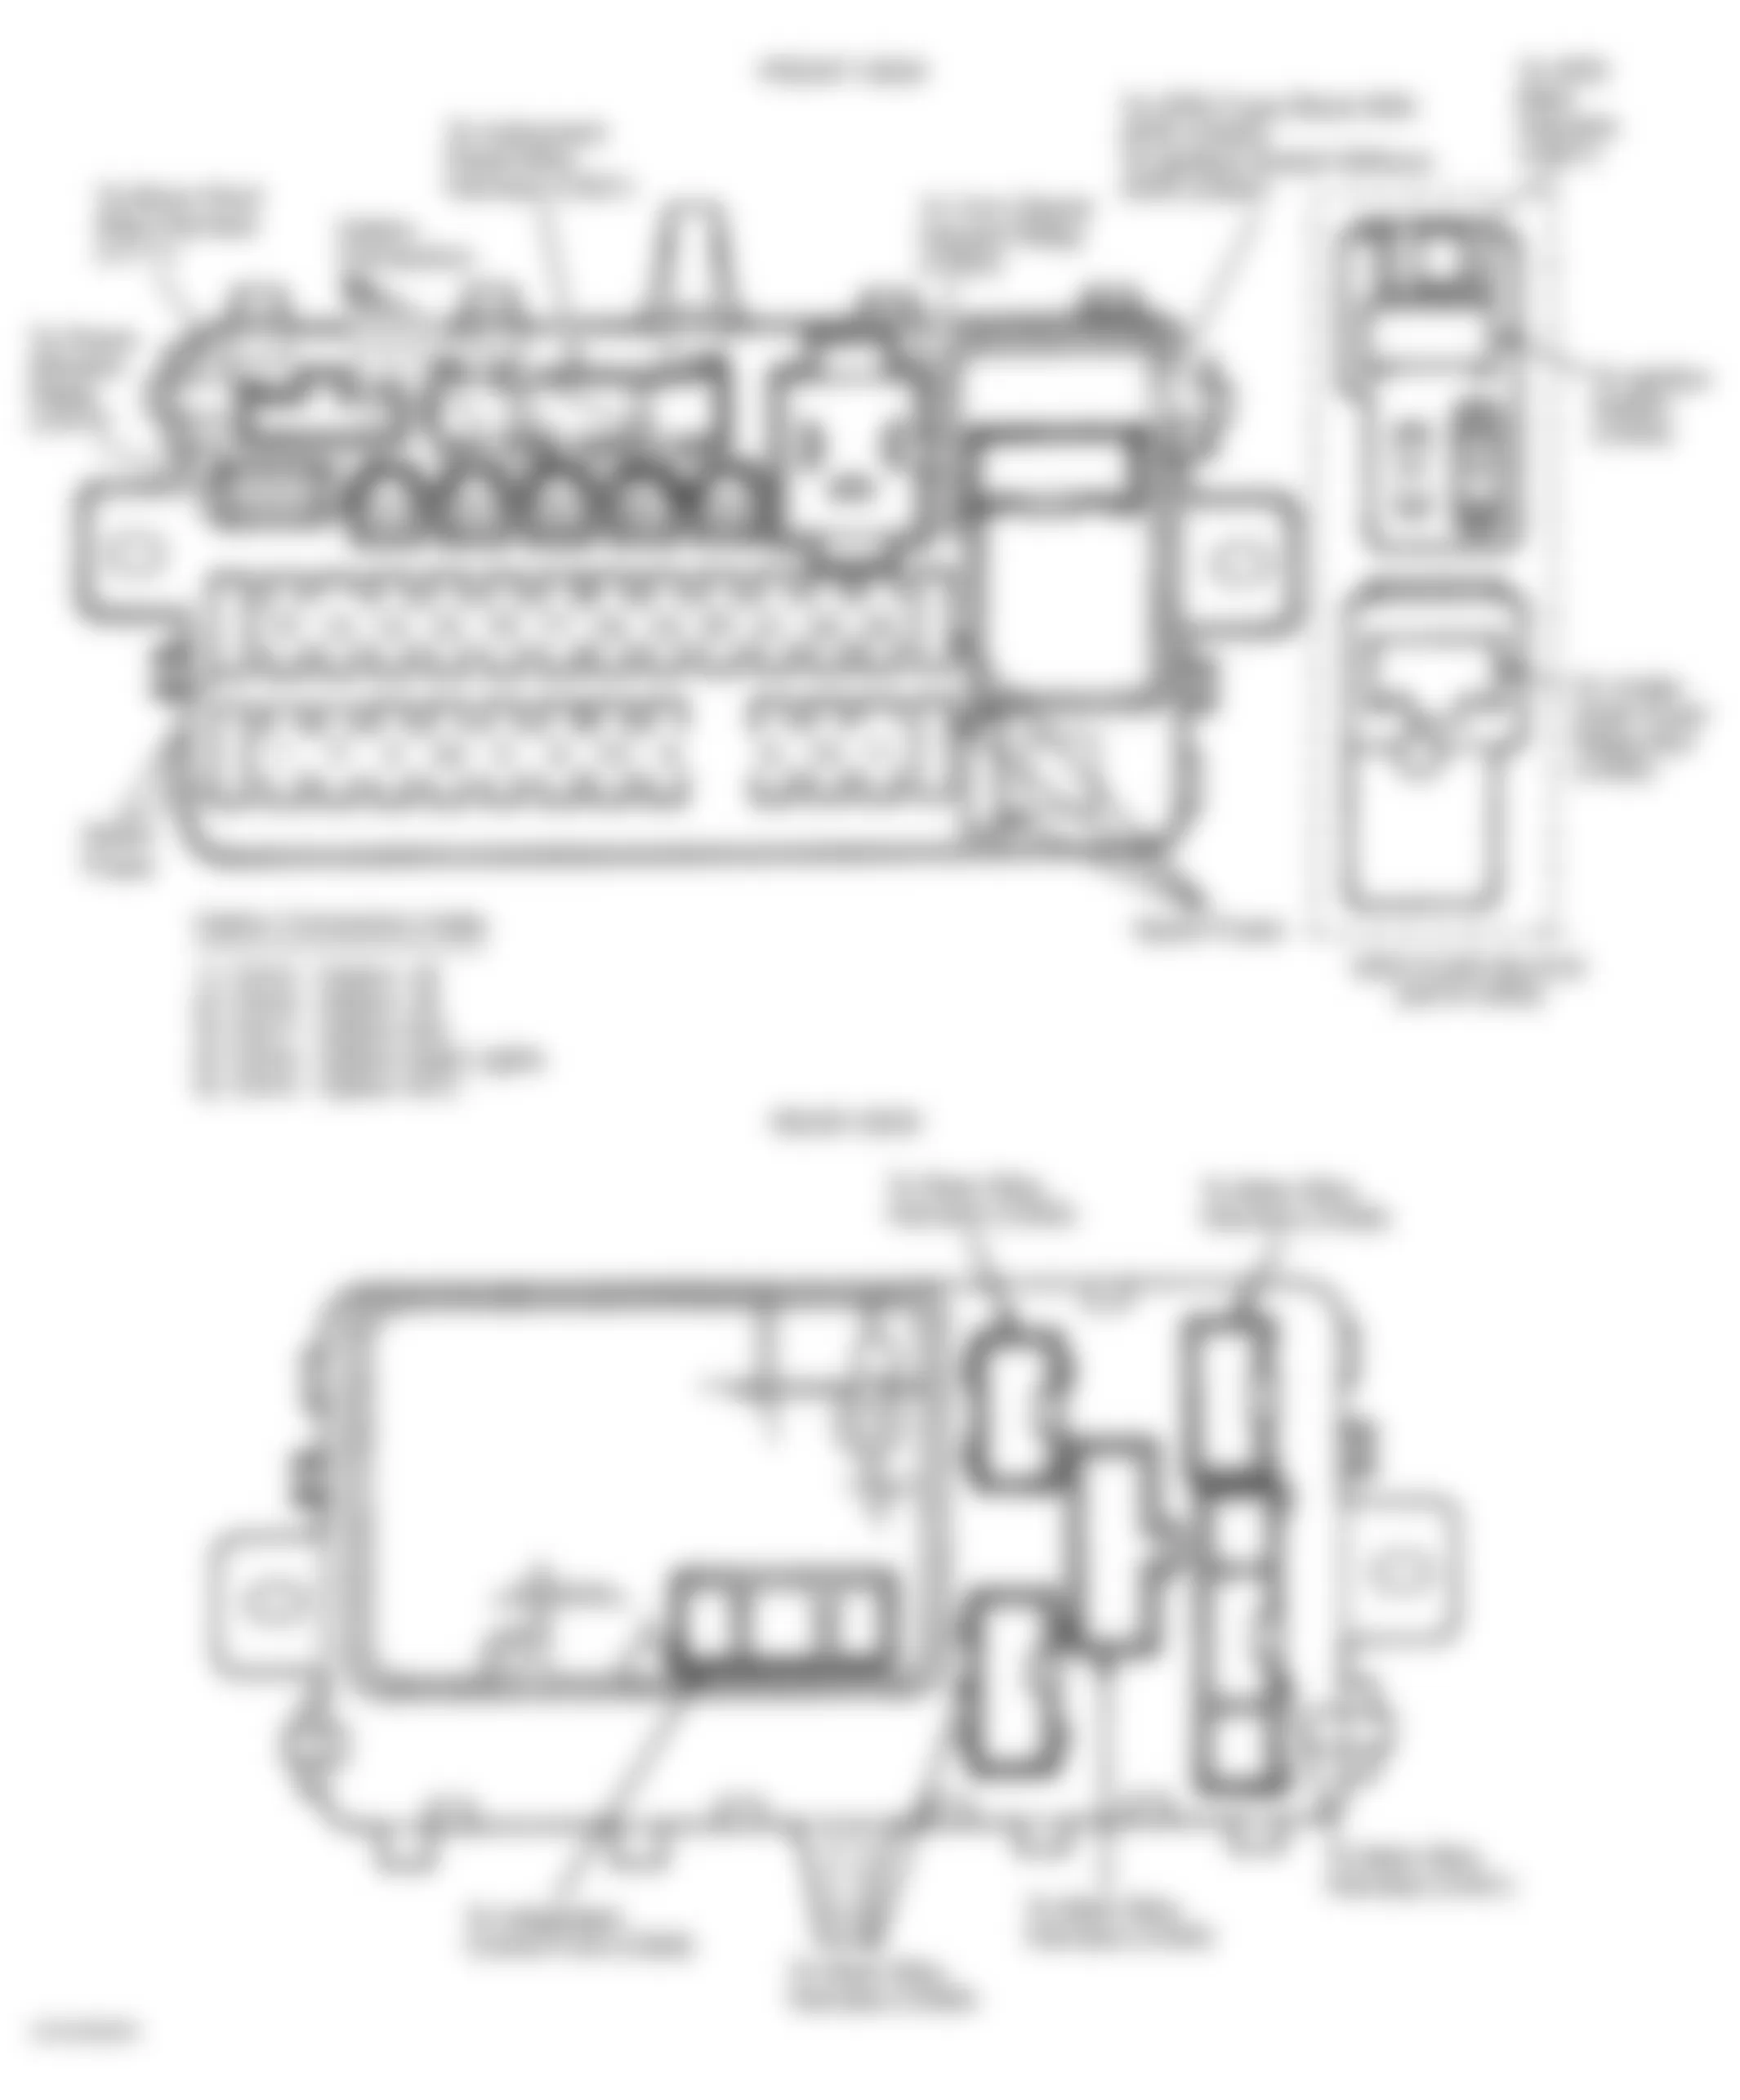 Honda Civic EX 1995 - Component Locations -  Identifying Under-Dash Fuse/Relay Box Components (1994-95 Civic)